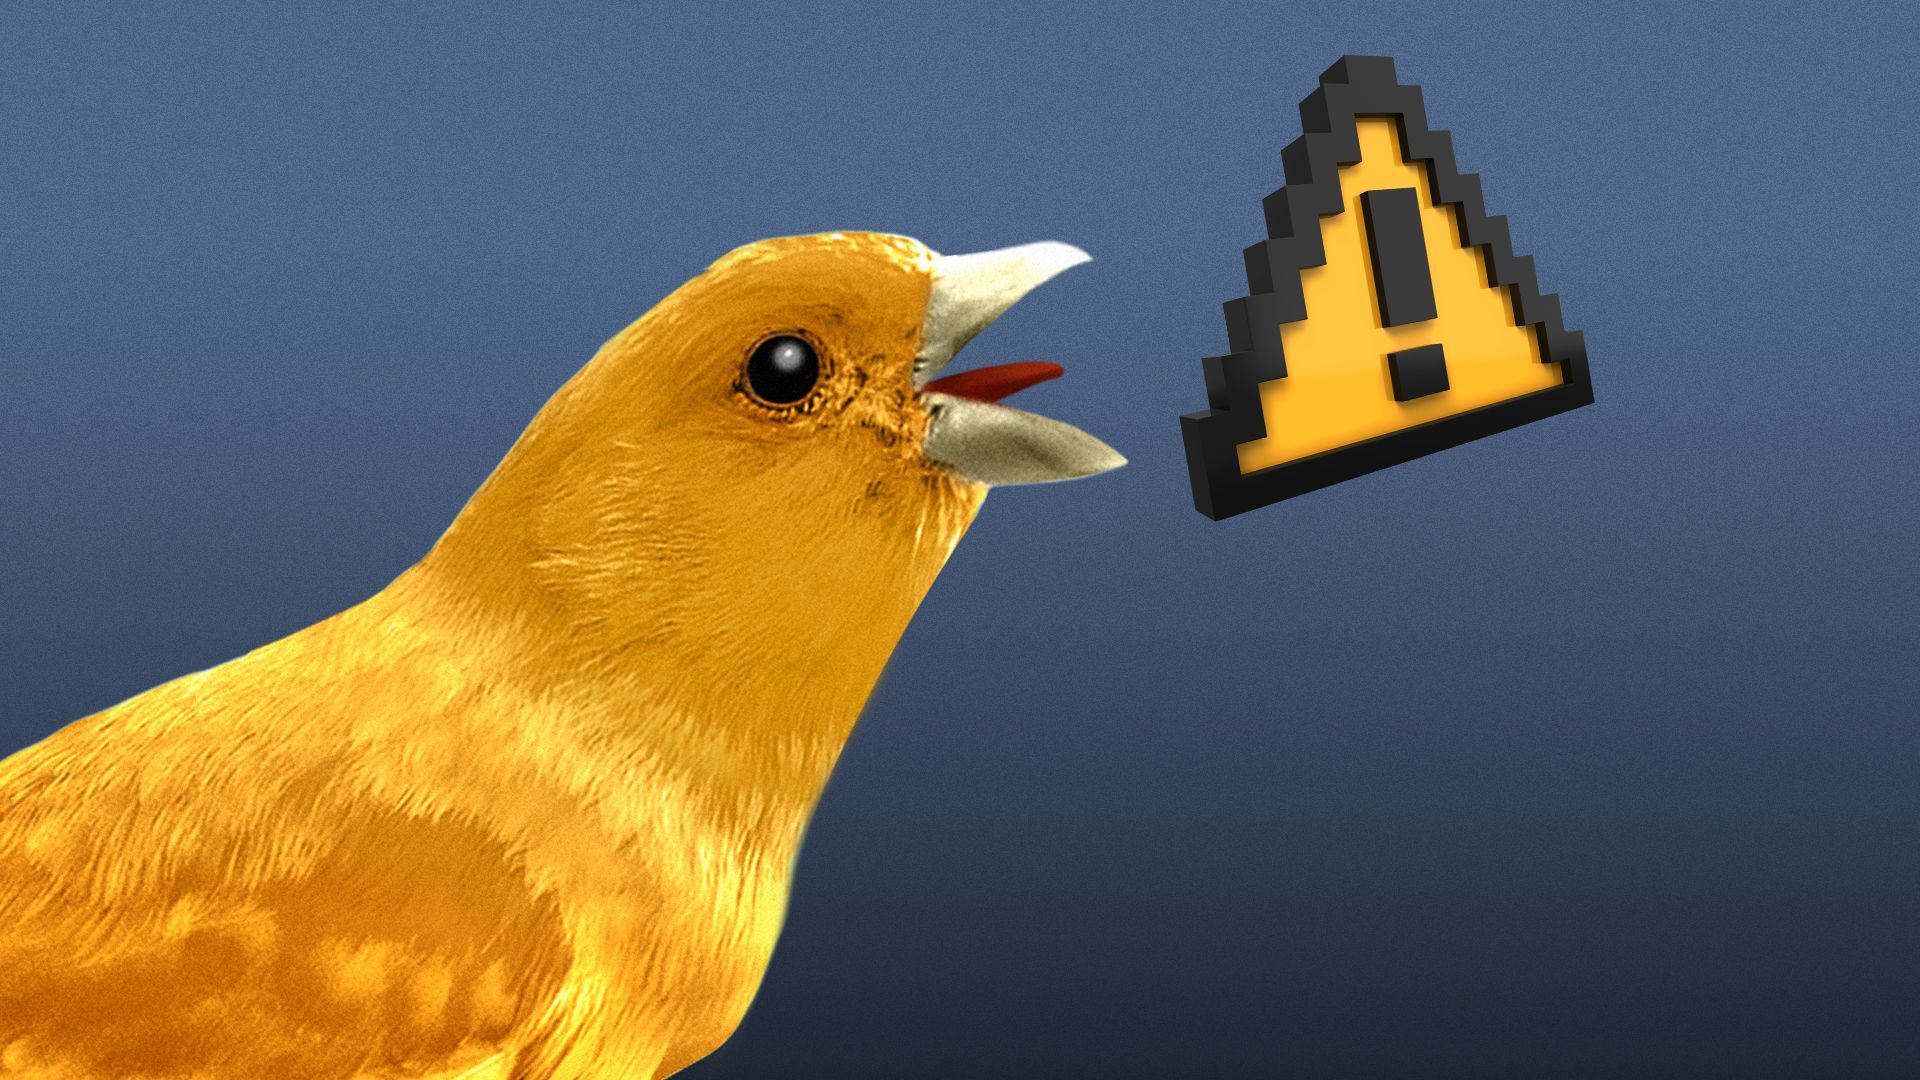 Illustration of a canary with its beak open next to an exclamation mark caution sign.